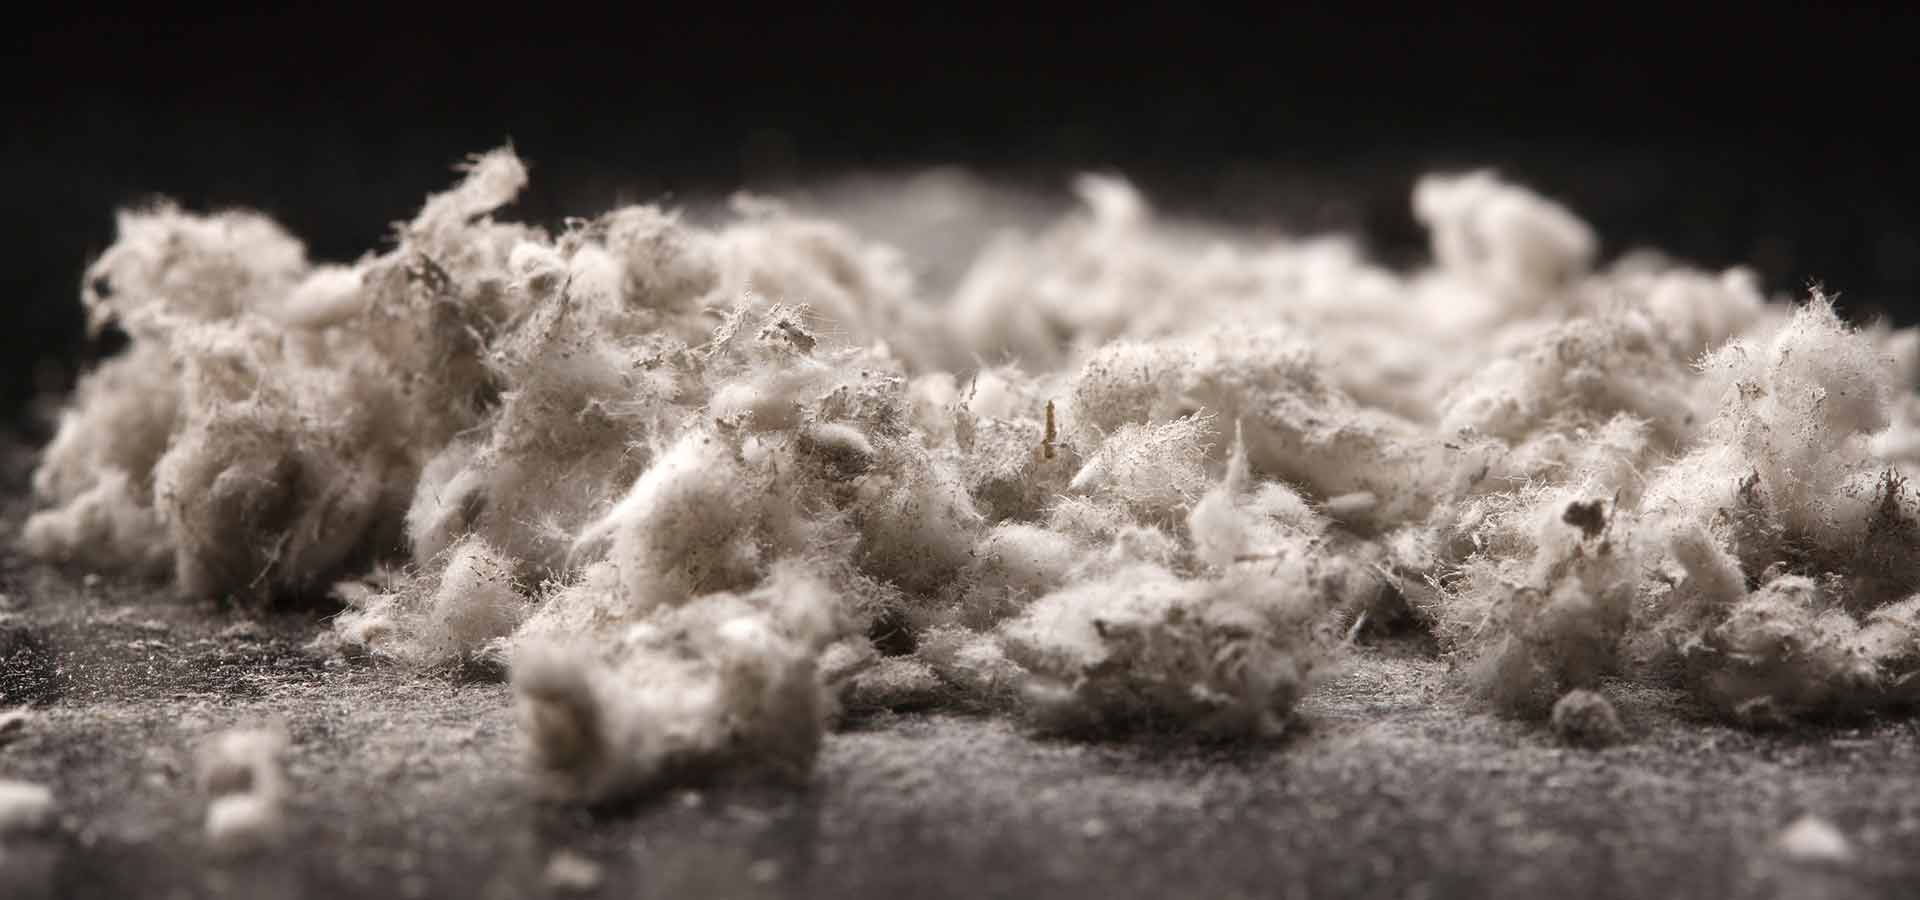 Are you aware of the danger of asbestos?